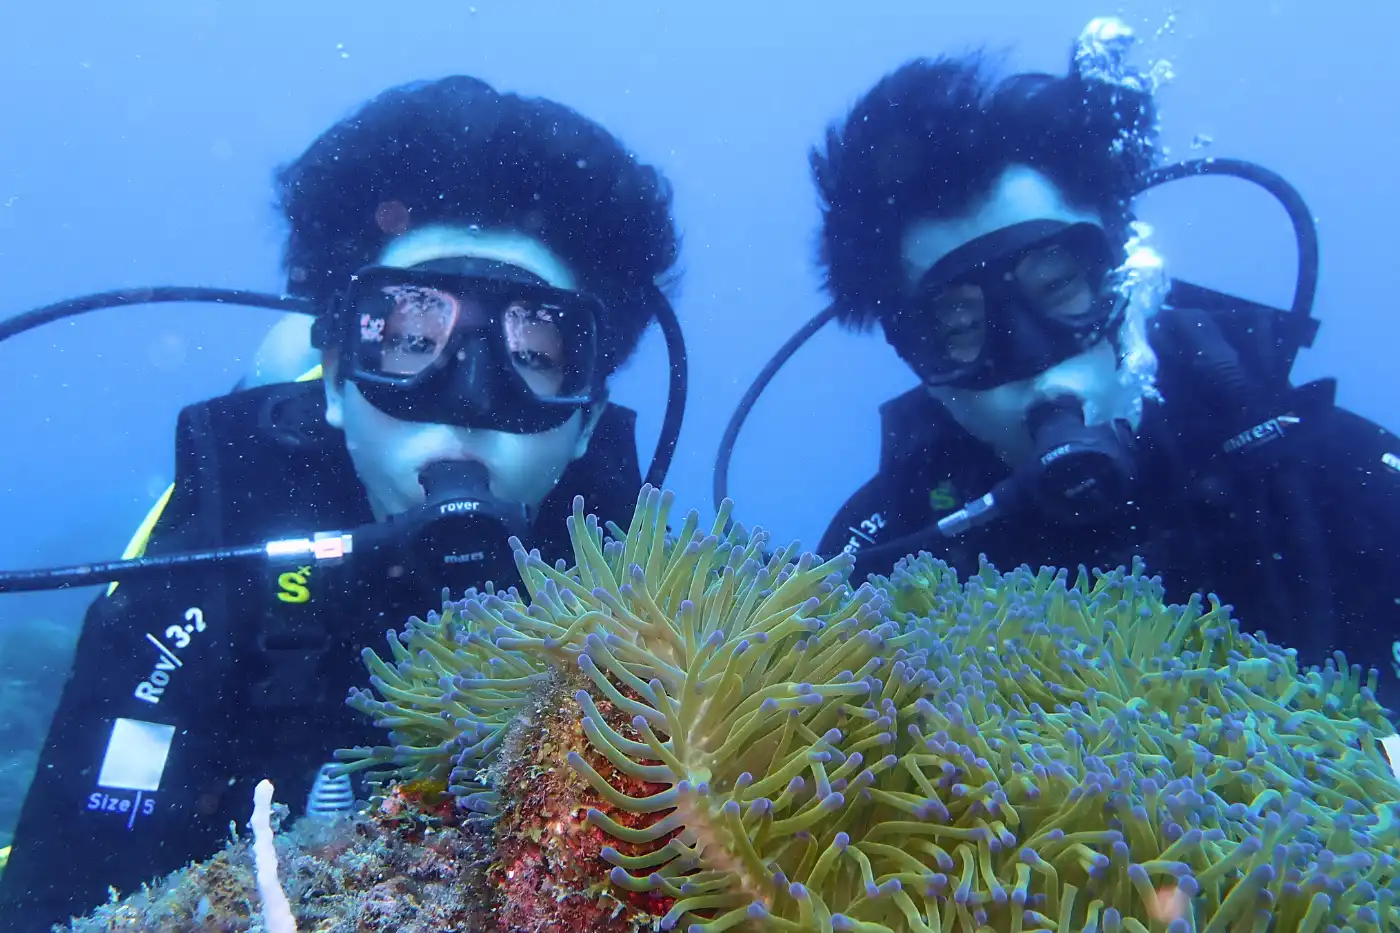 Two scuba divers exploring coral reefs near Mantanani Island, observing marine life in clear blue waters.